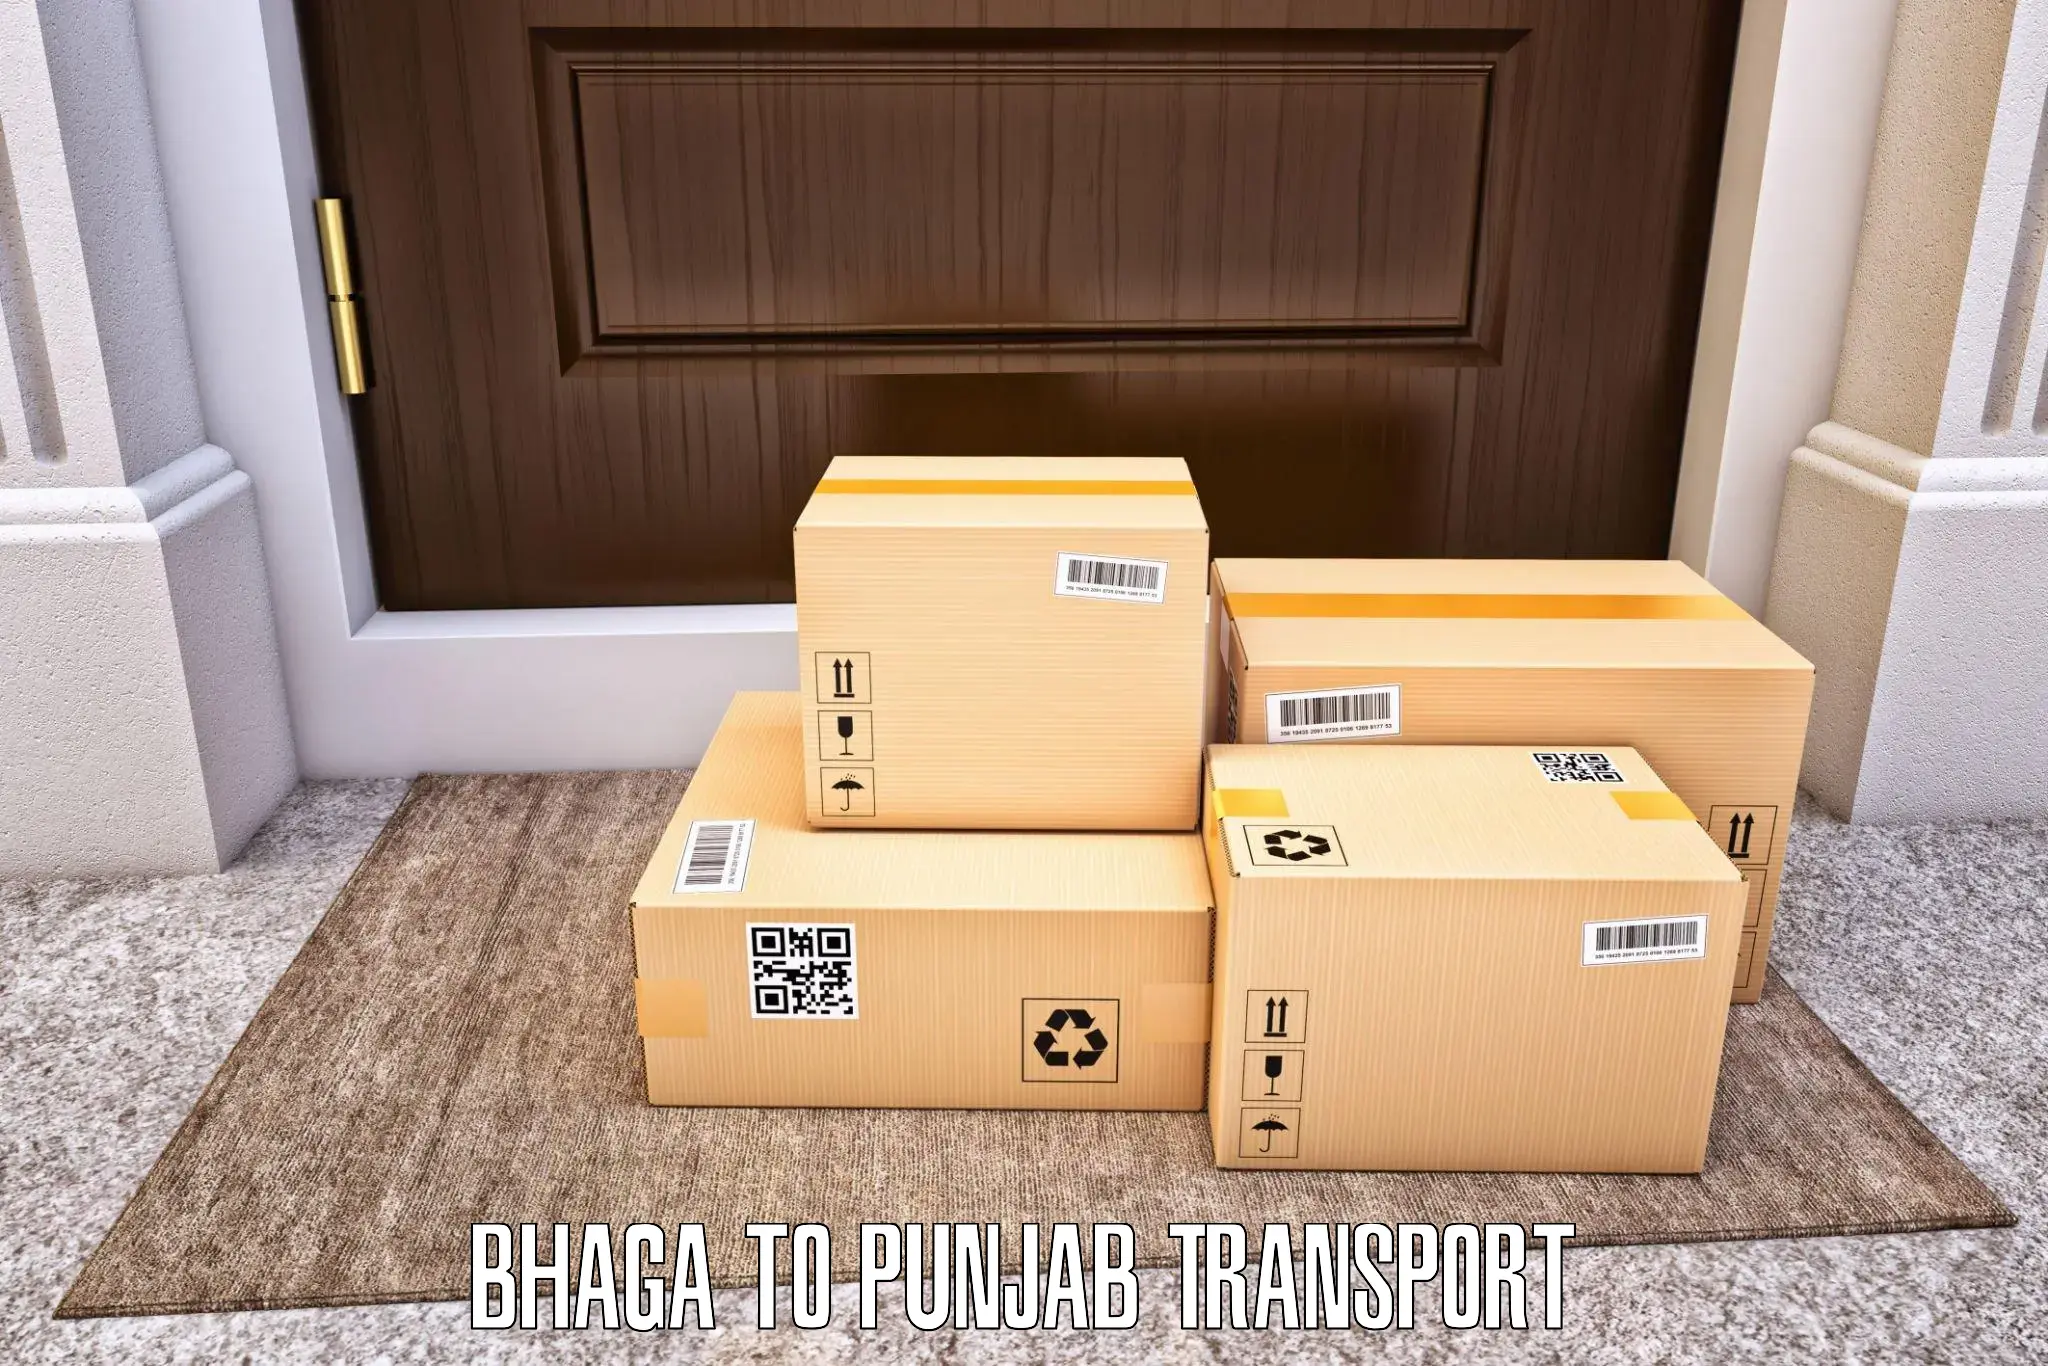 Road transport online services Bhaga to Mohali